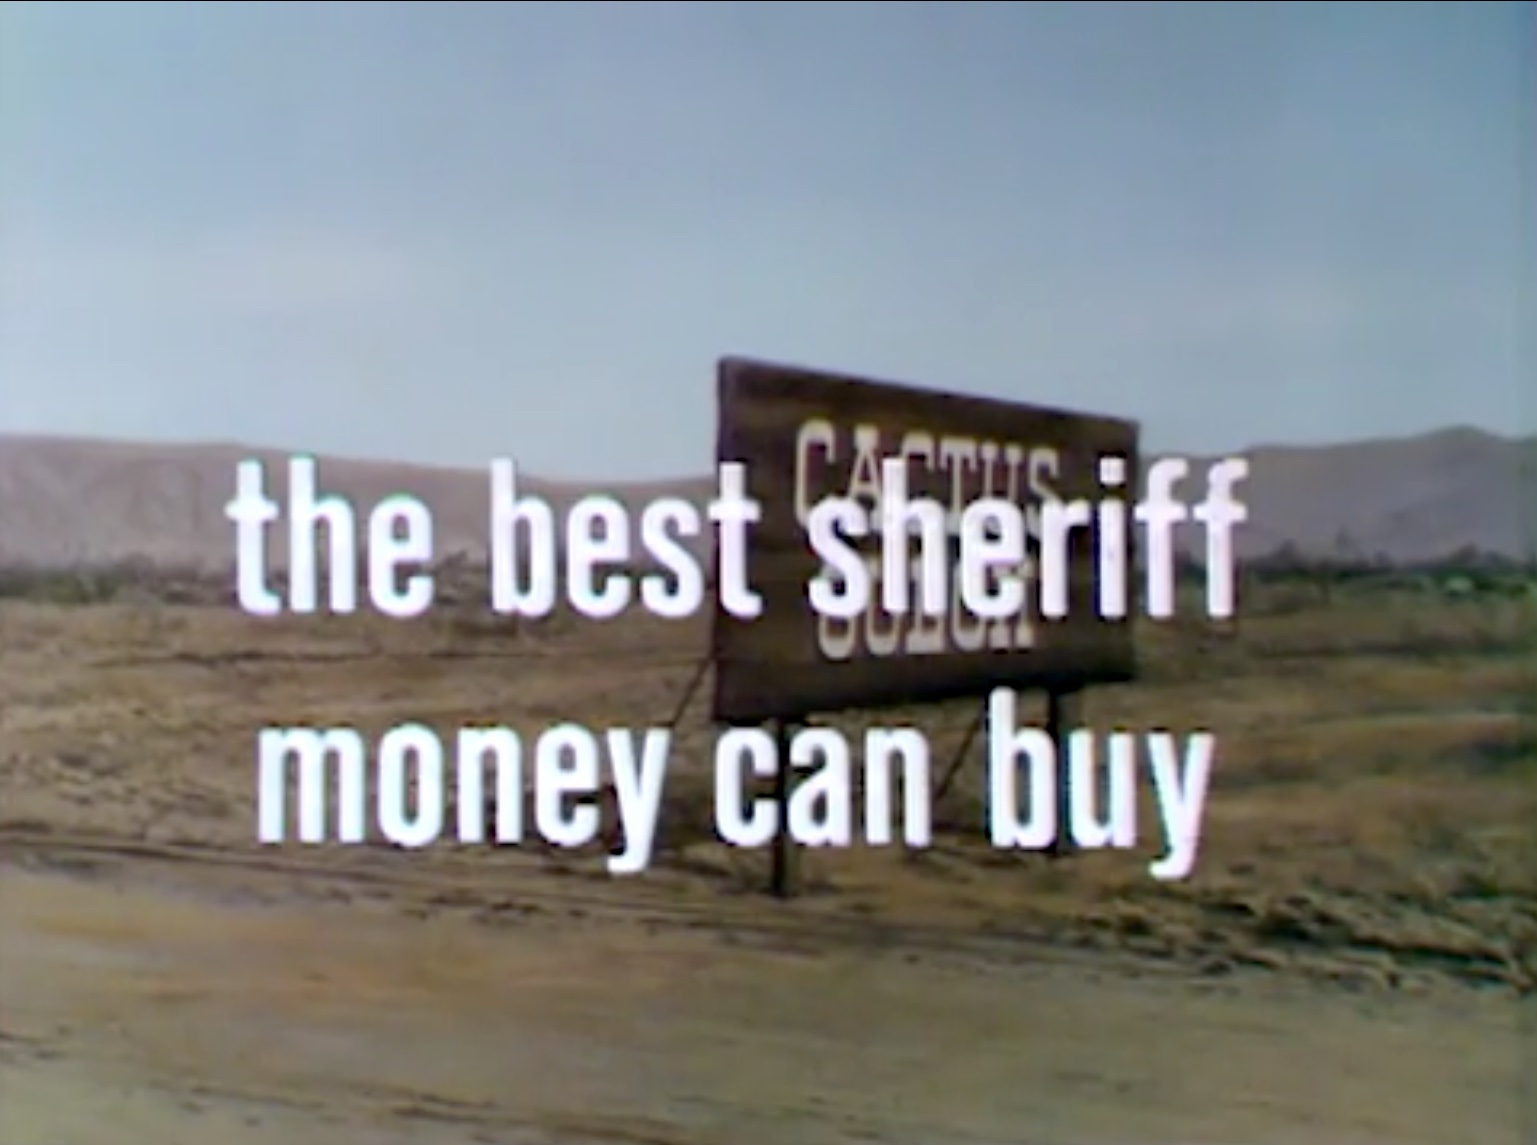 The Best Sheriff Money Can Buy - The Red Skelton Hour with Jack Jones - season 16, originally aired November 22, 1966